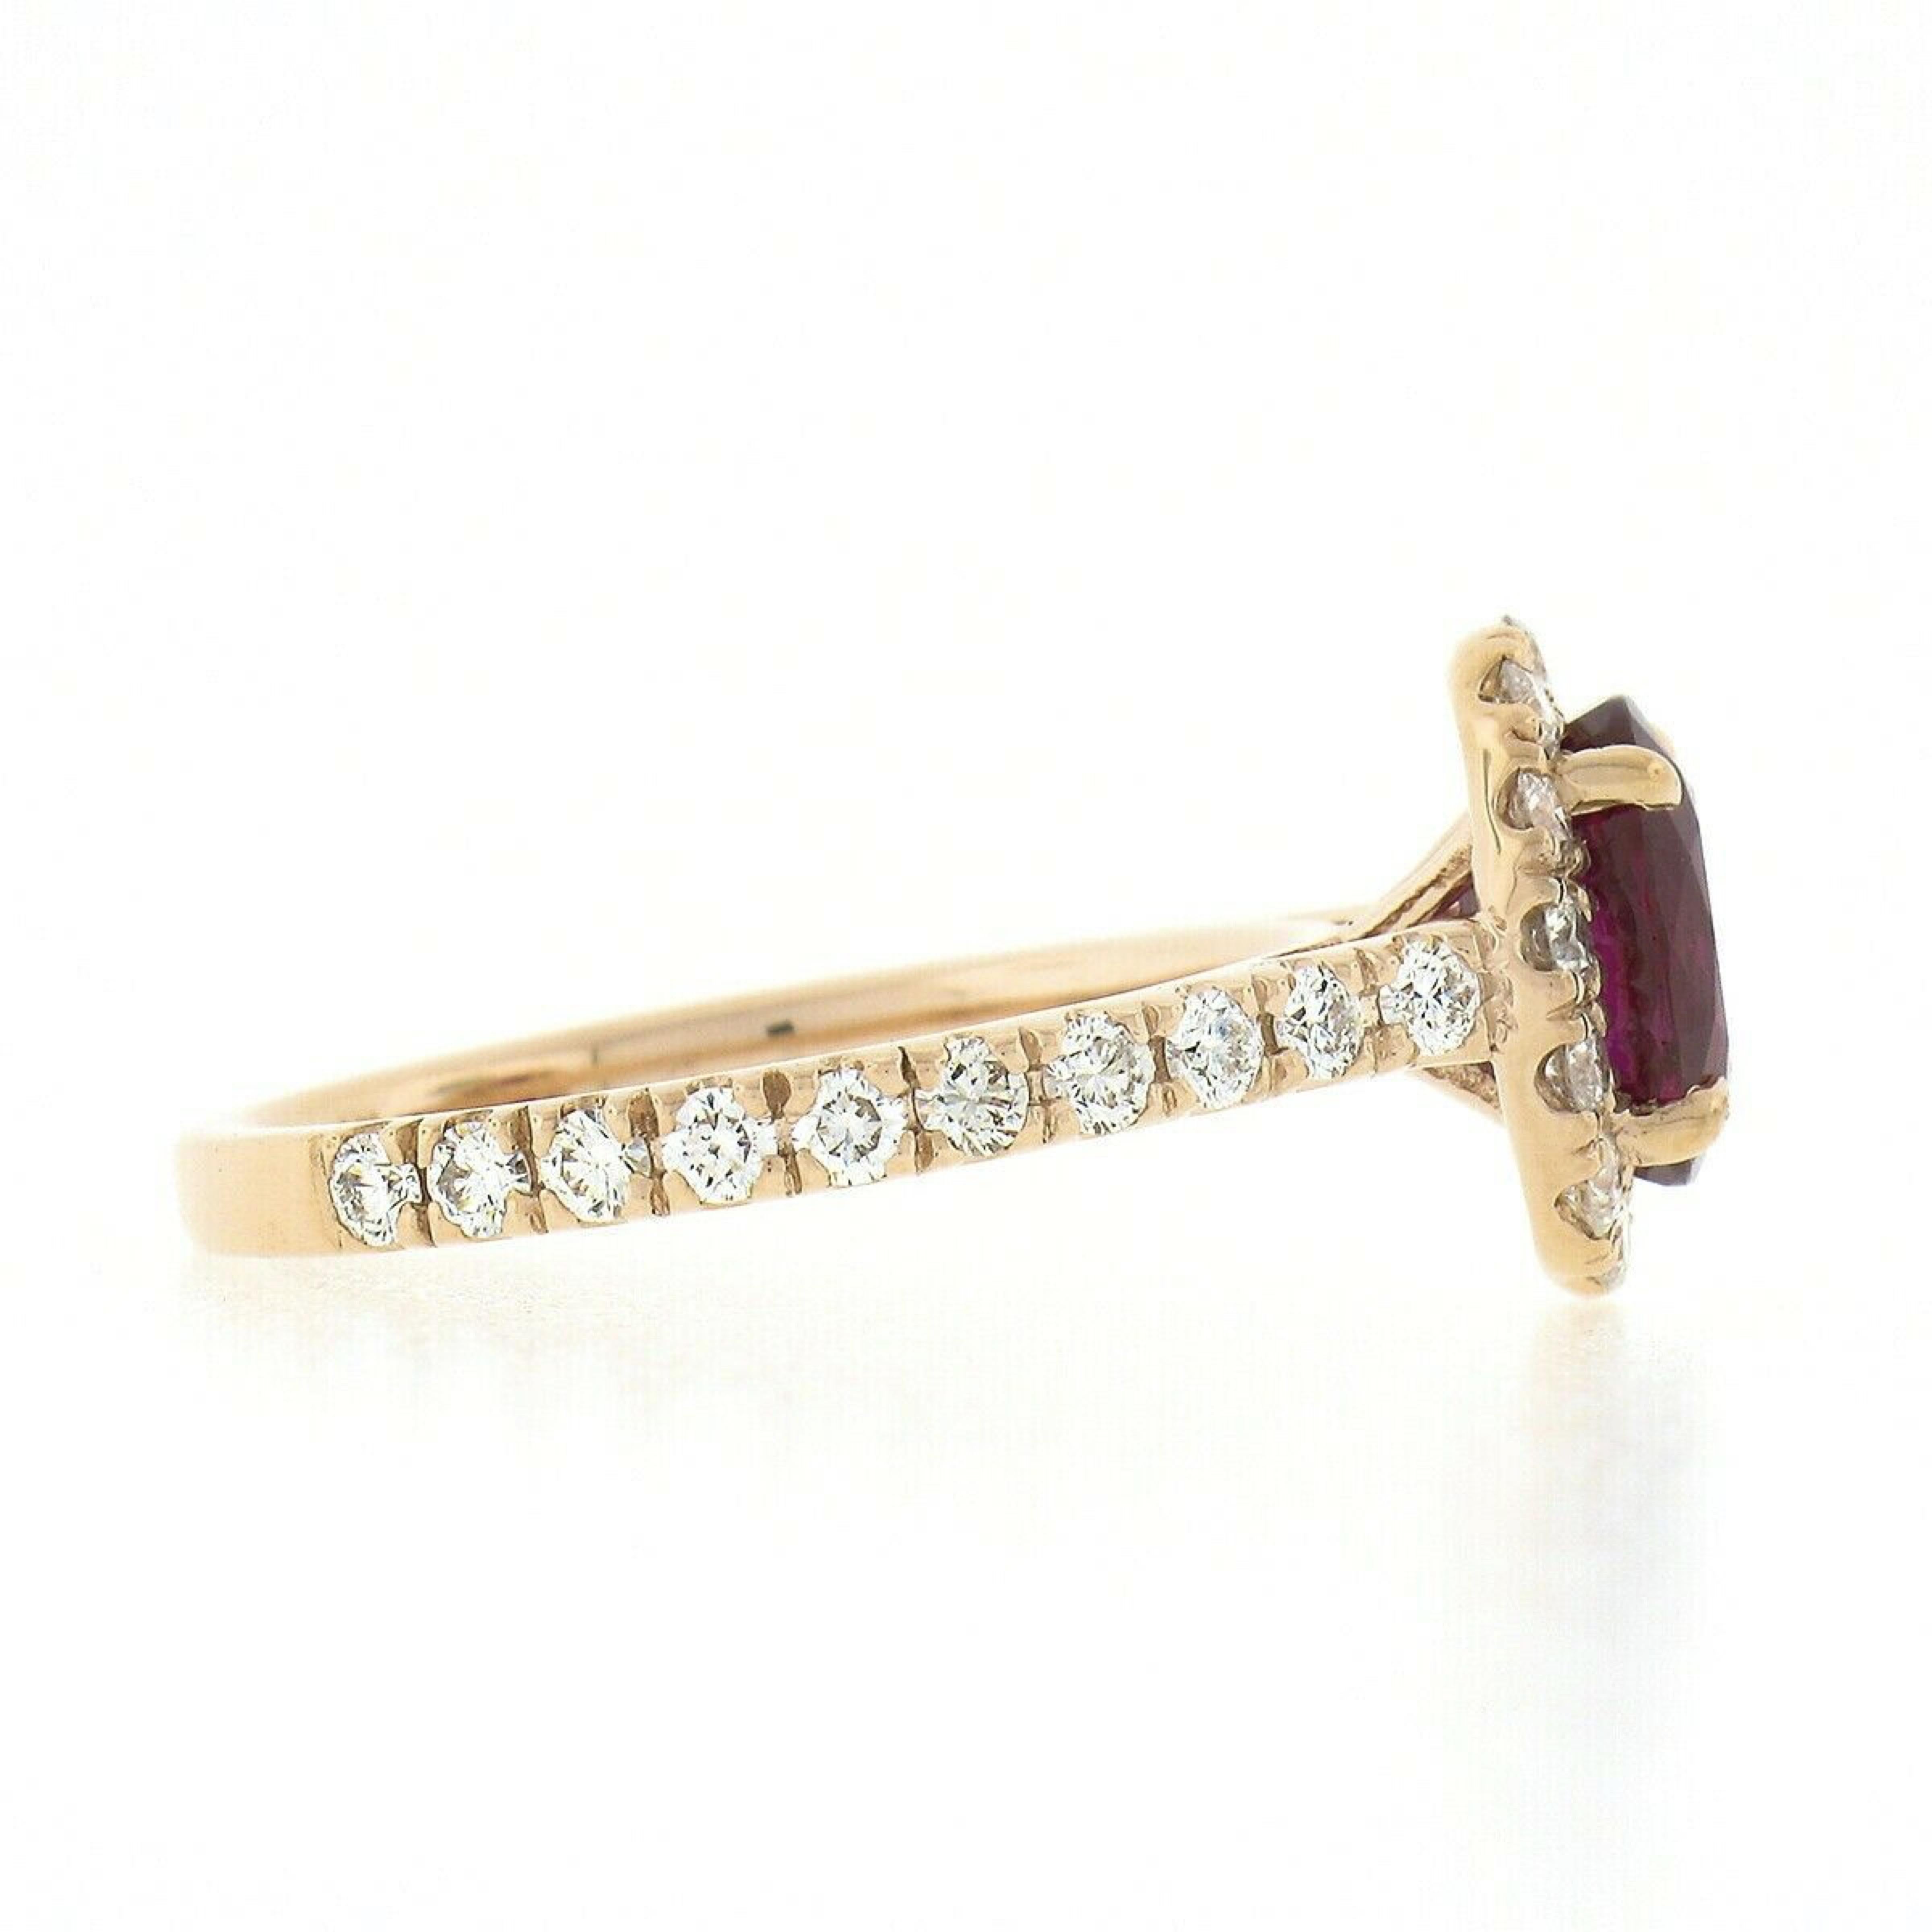 New 14k Rose Gold 3.28ct GIA Oval Burma Ruby w/ Diamond Halo Engagement Ring In New Condition For Sale In Montclair, NJ